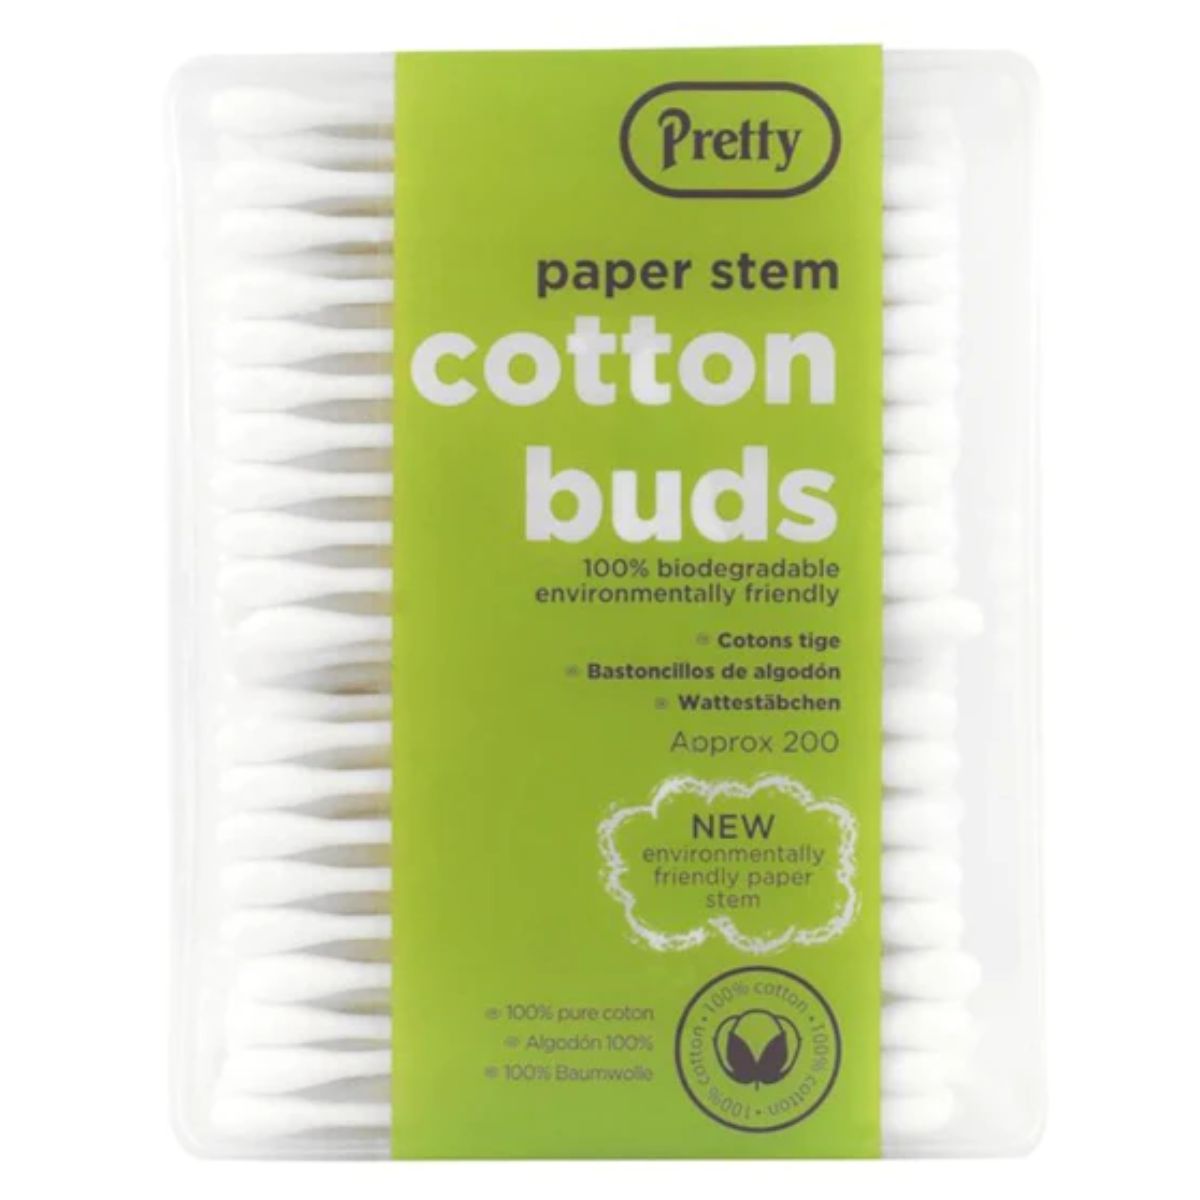 A package of Pretty - Cotton Buds Paper Stem - 200pcs.